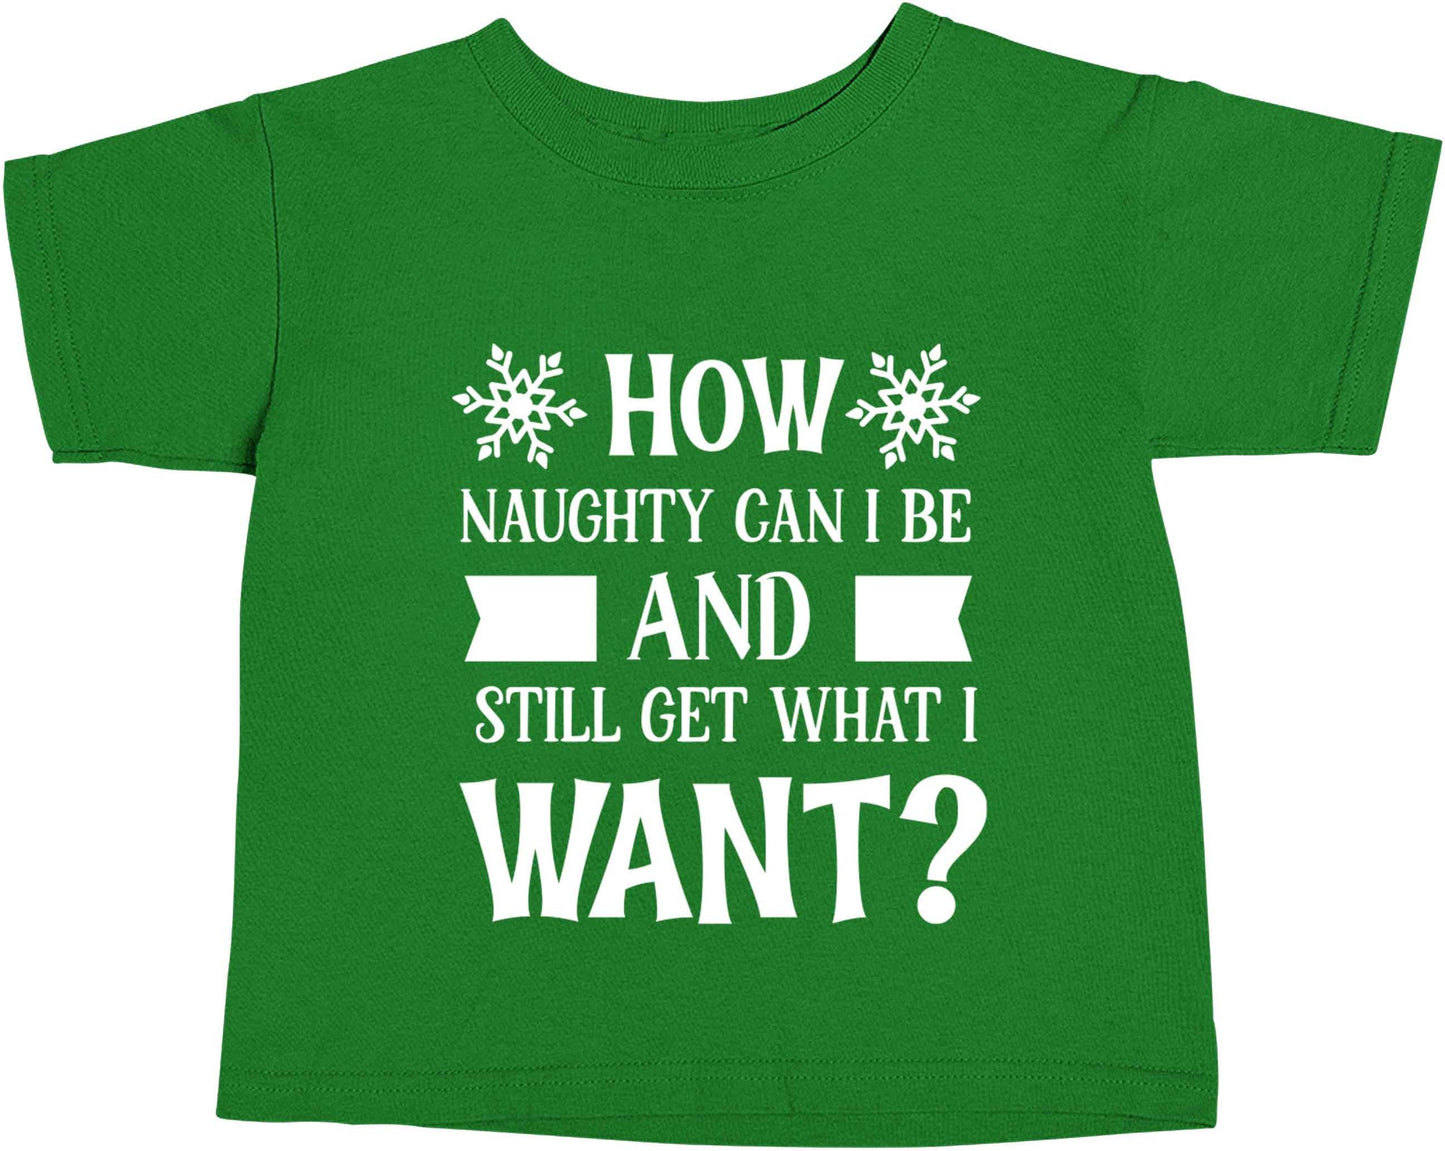 How naughty can I be and still get what I want? green baby toddler Tshirt 2 Years